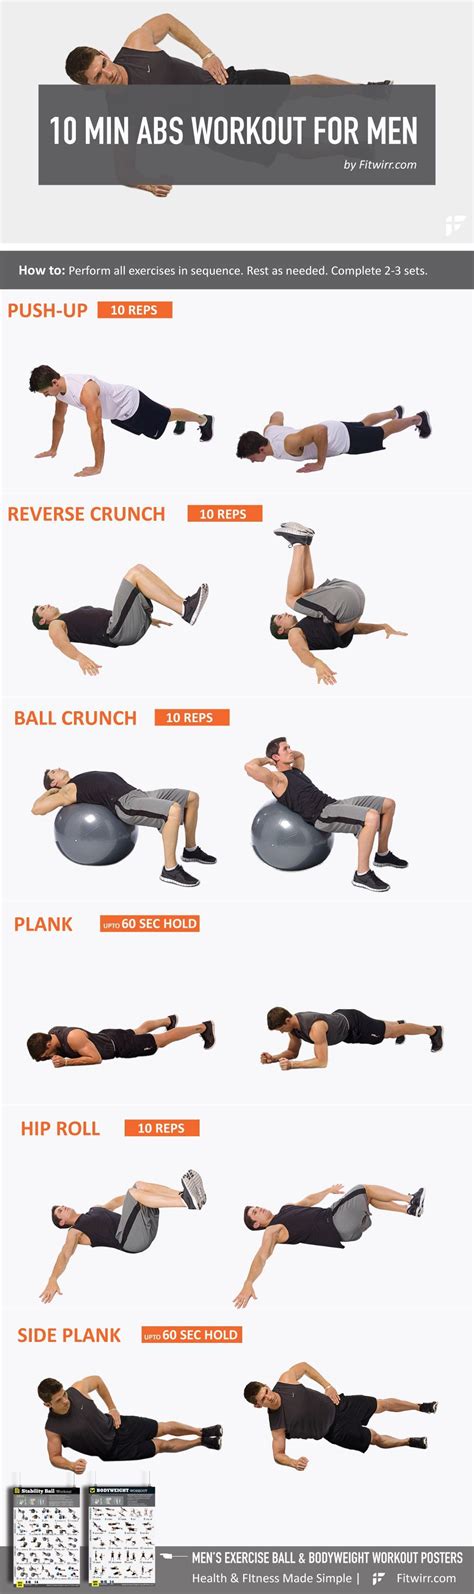 10 Minute Abs Workout For Men 10 Minute Ab Workout Ab Workout Men Abs Workout